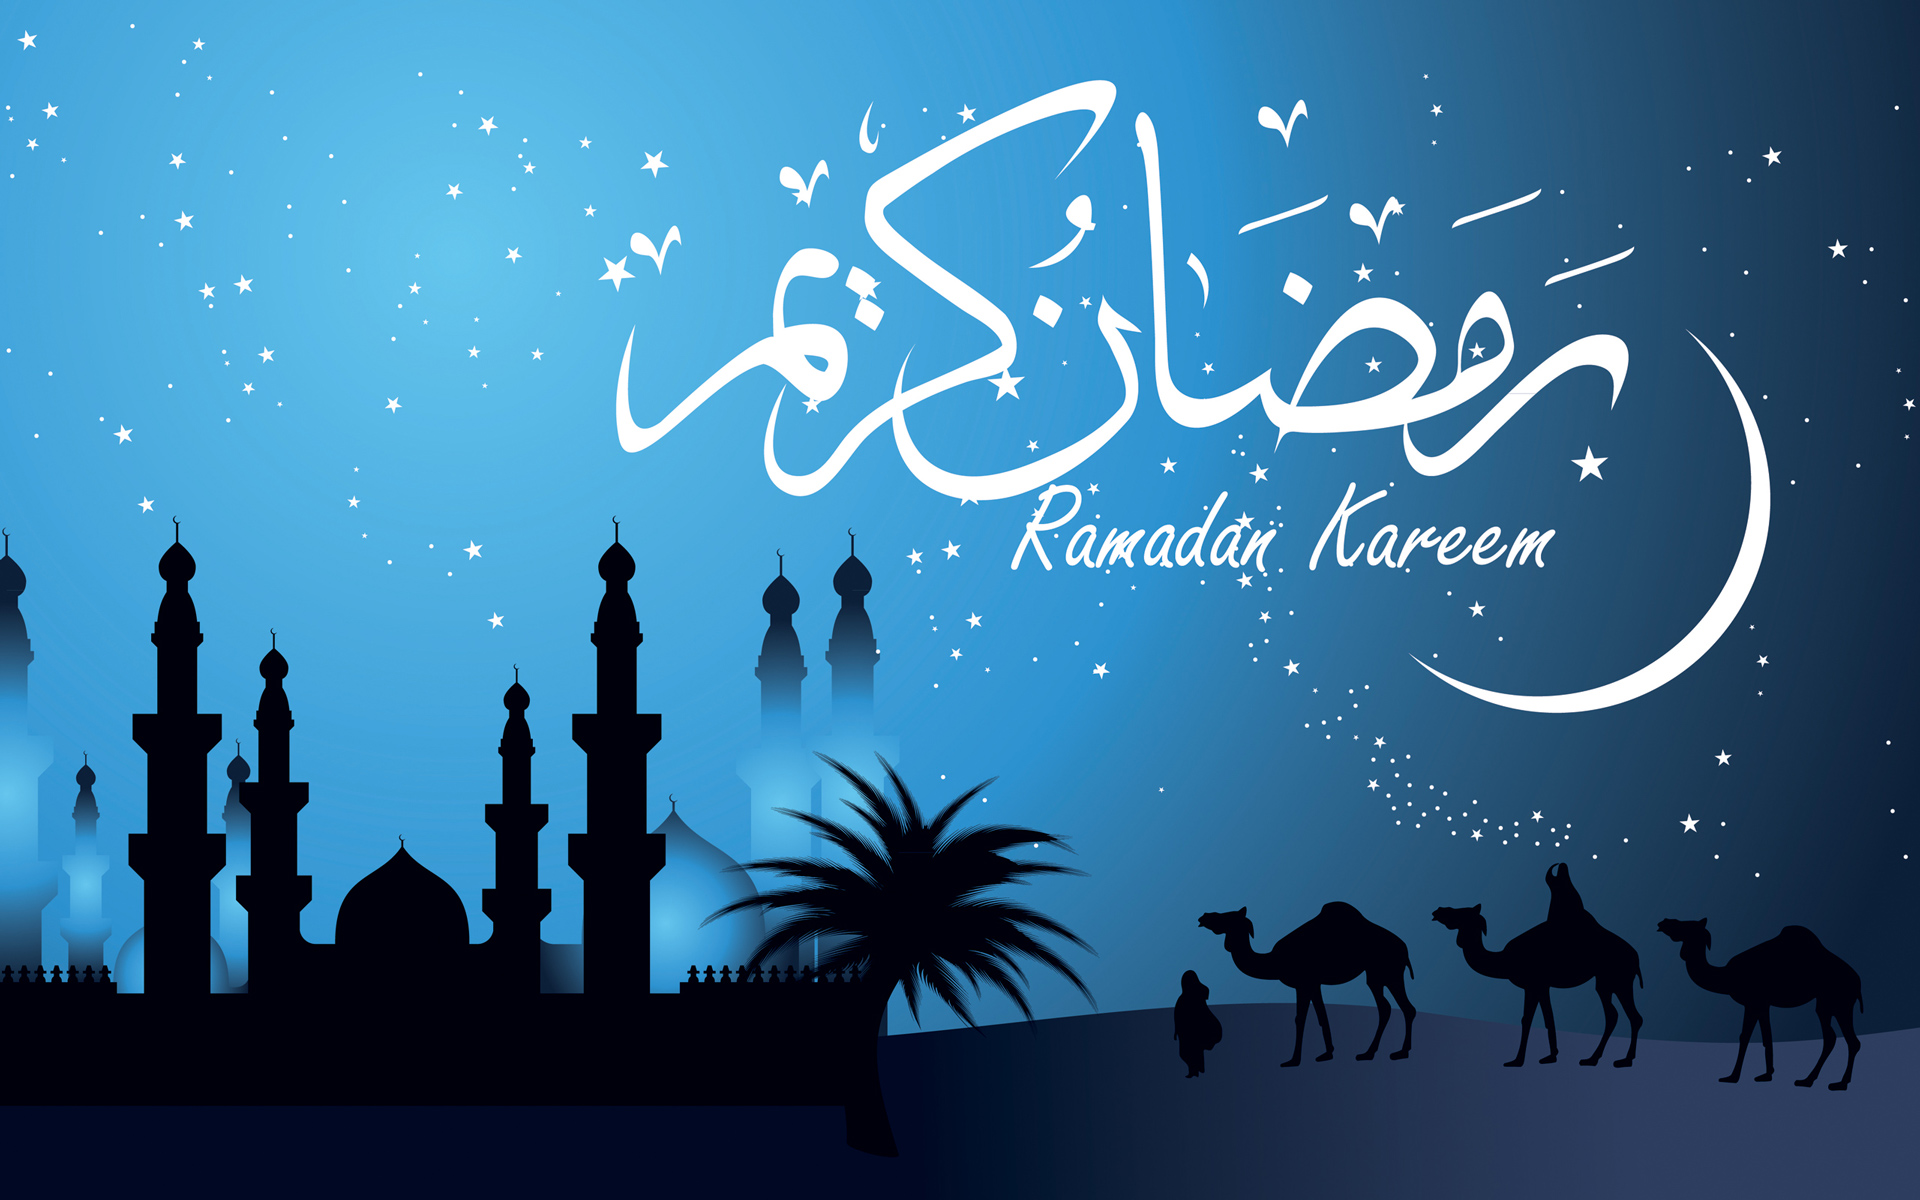 Ramadan: Month of Fasting or Month of Feasting?